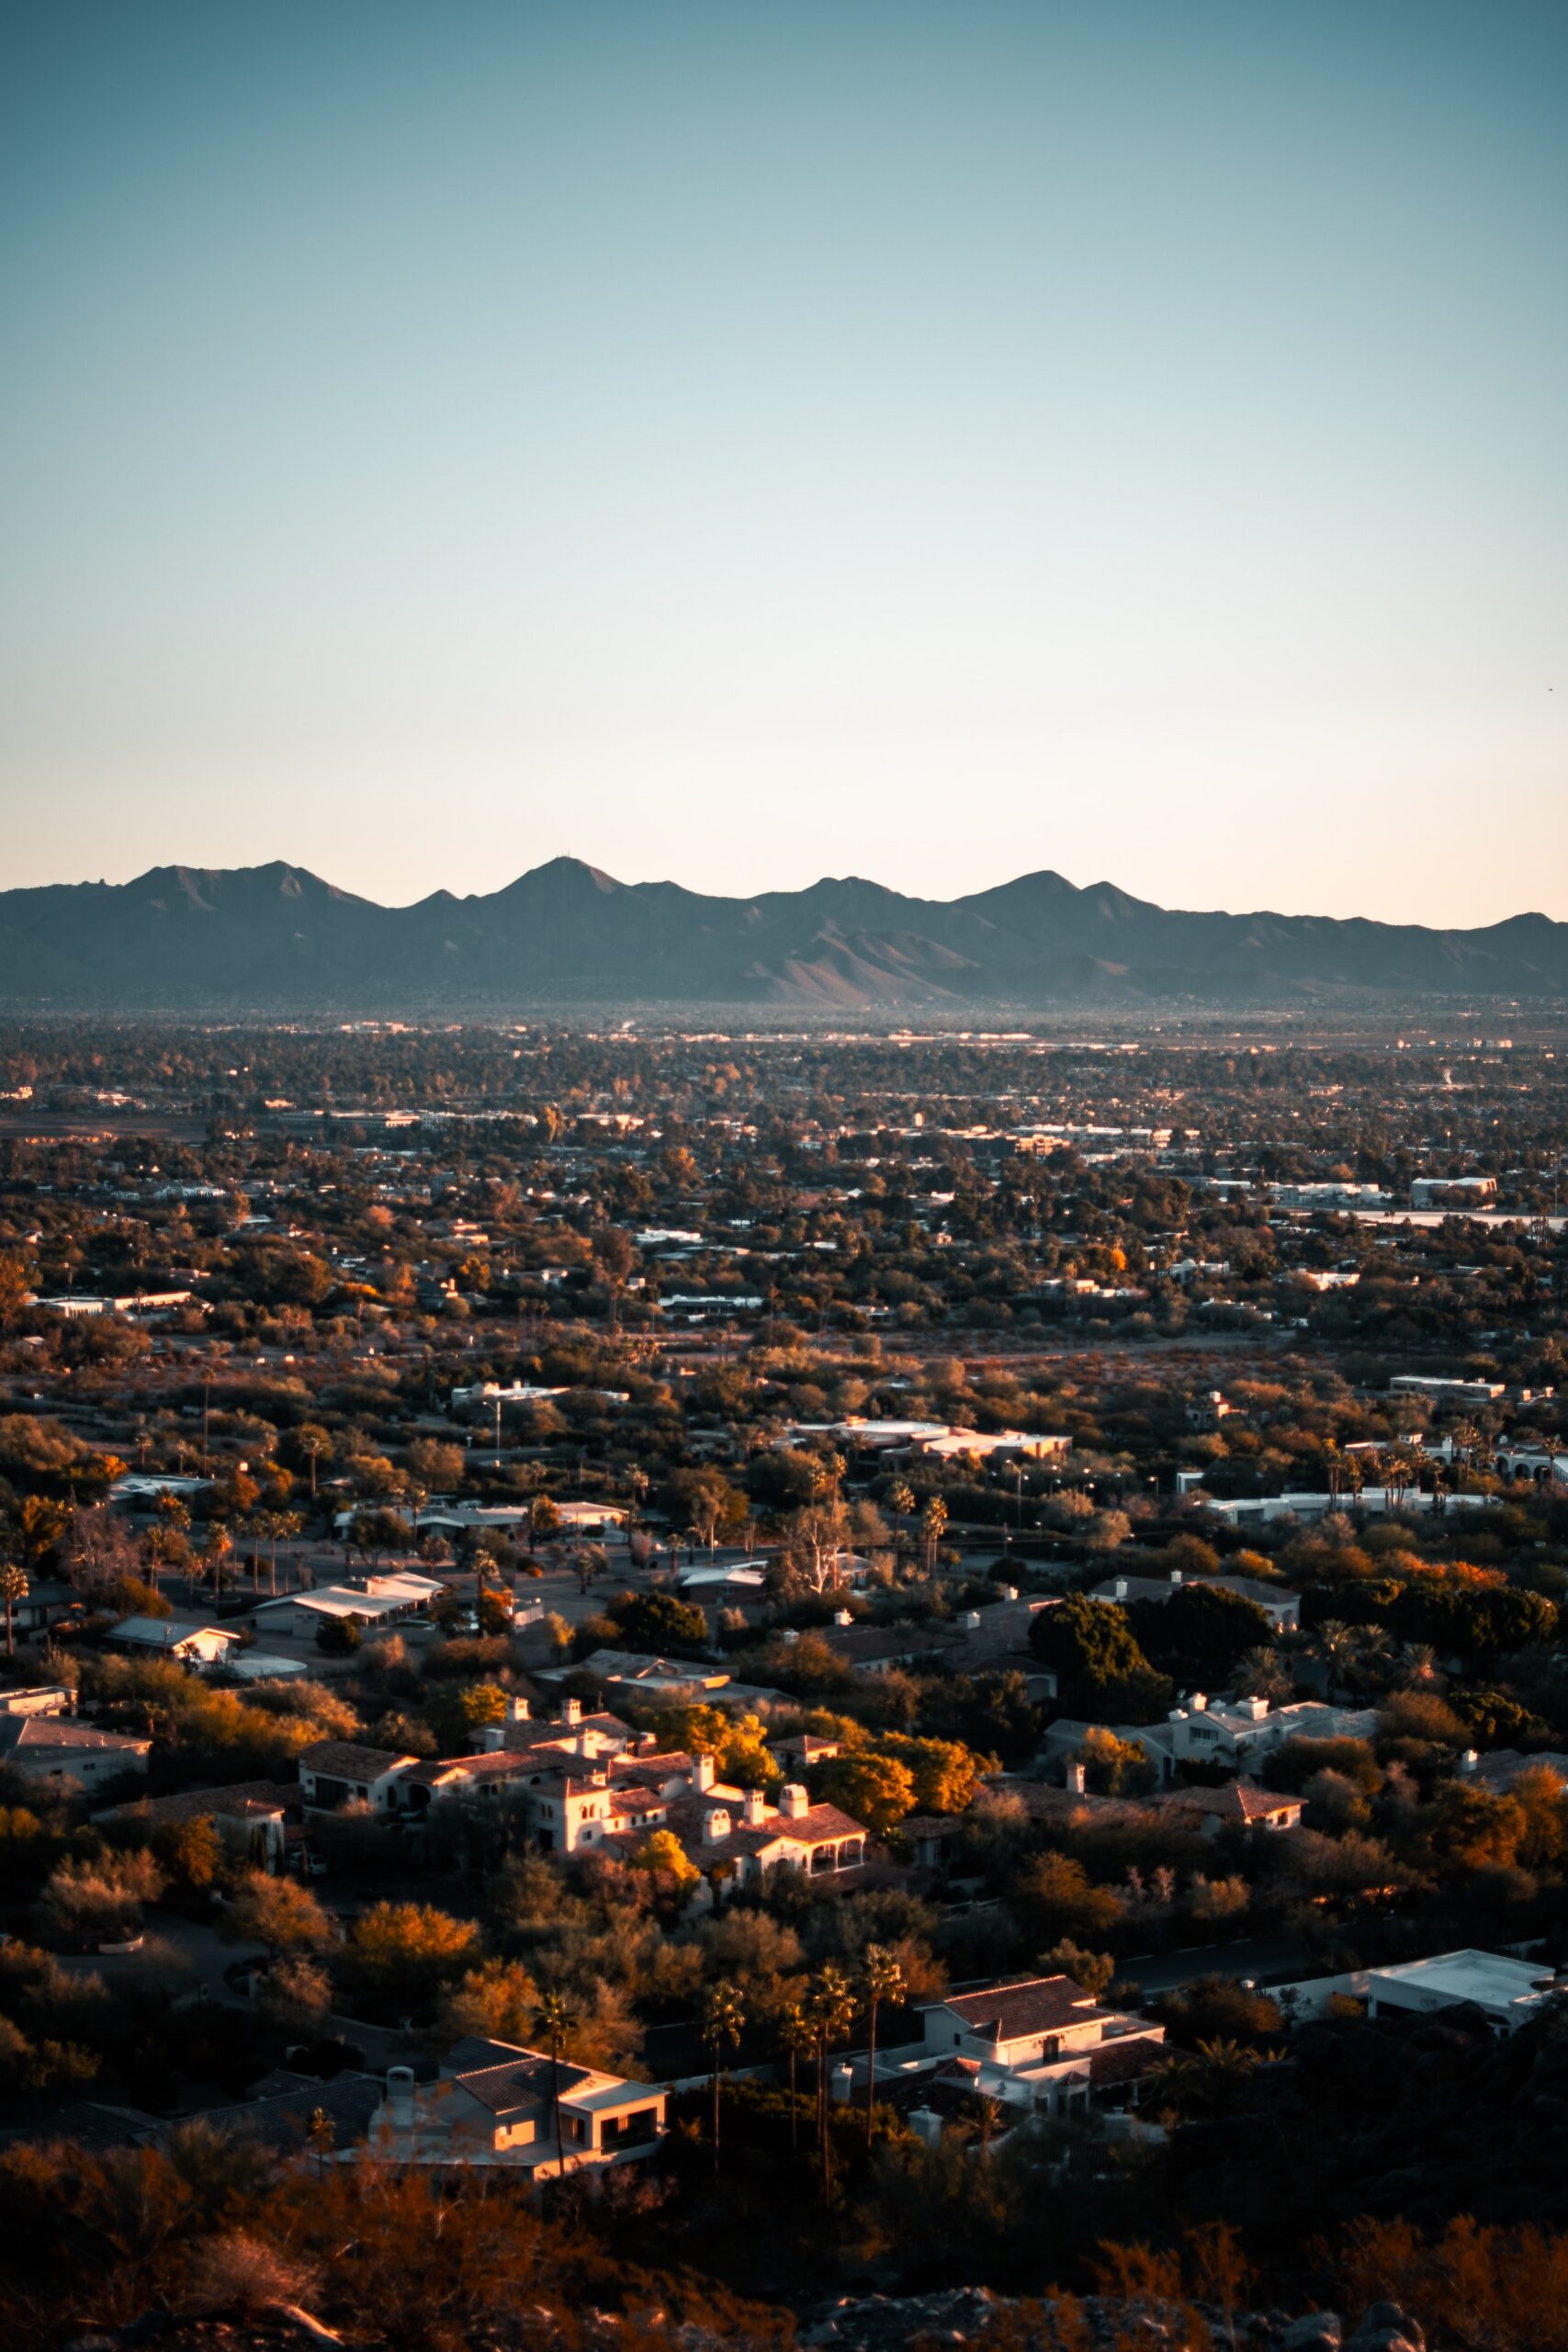 A Major Money Saver: What Is the Cost of Living in Phoenix?